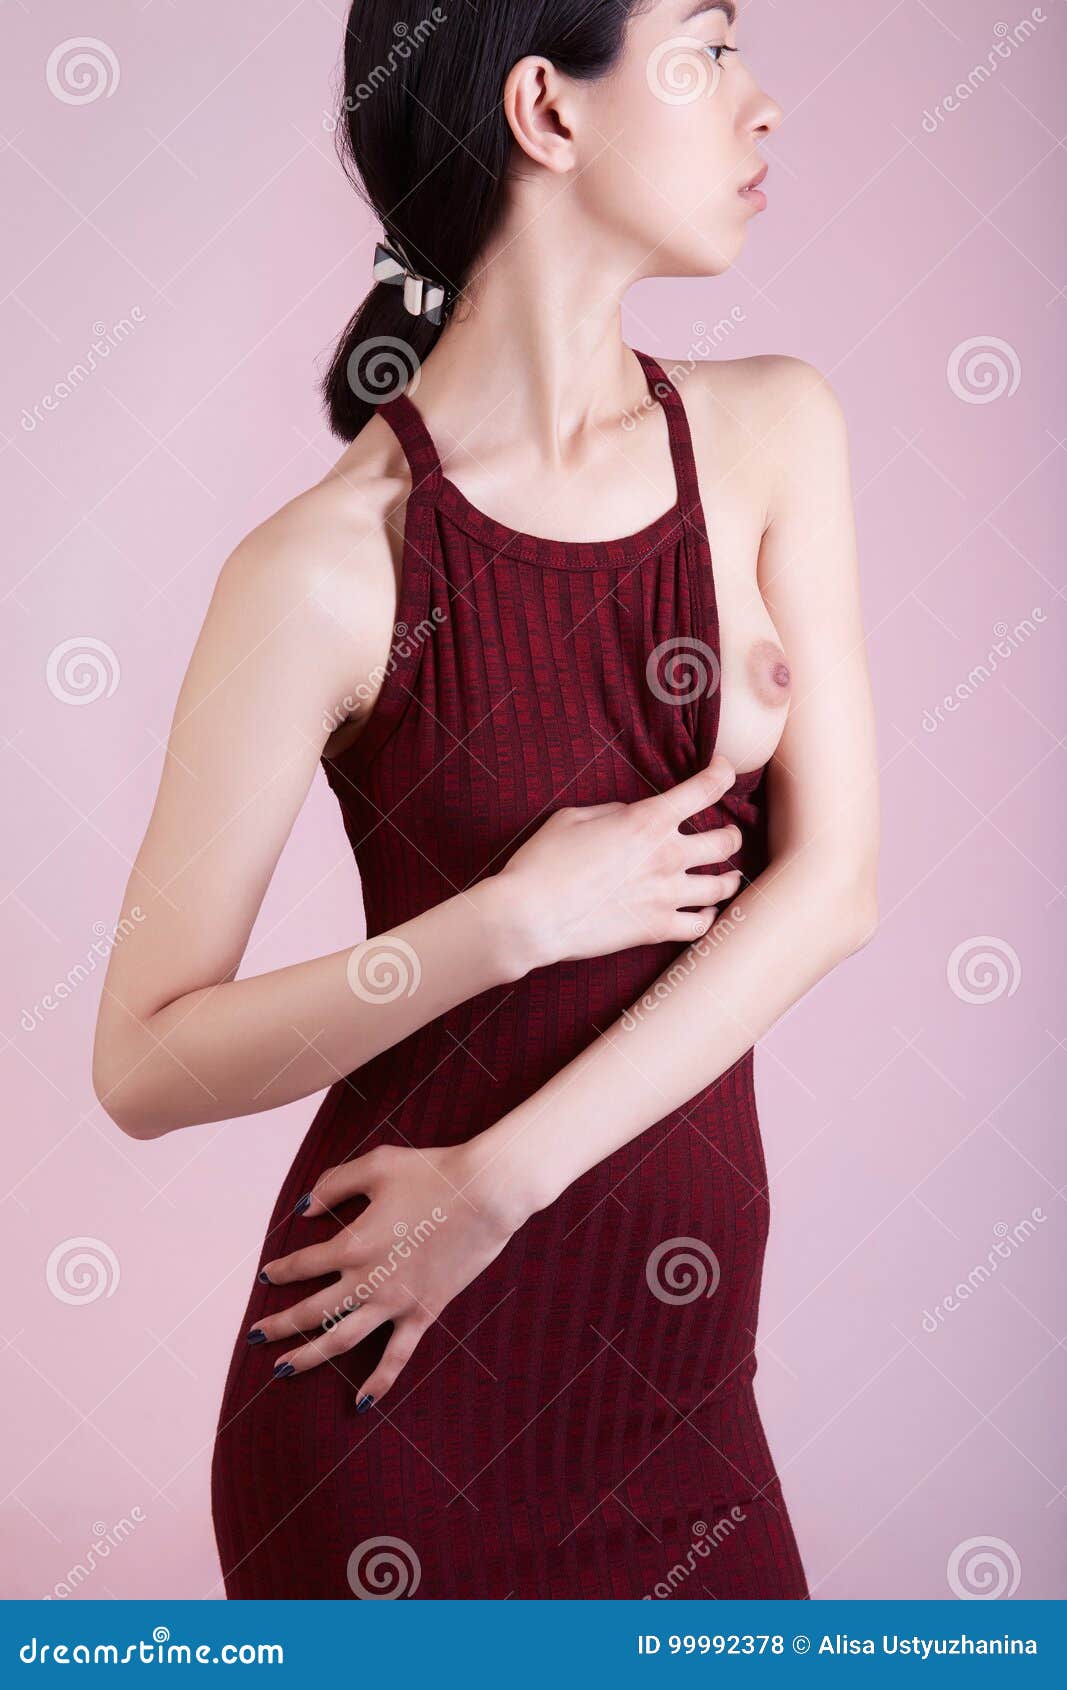 Woman with a Beautiful Naked Breast Stock Photo - Image of beauty